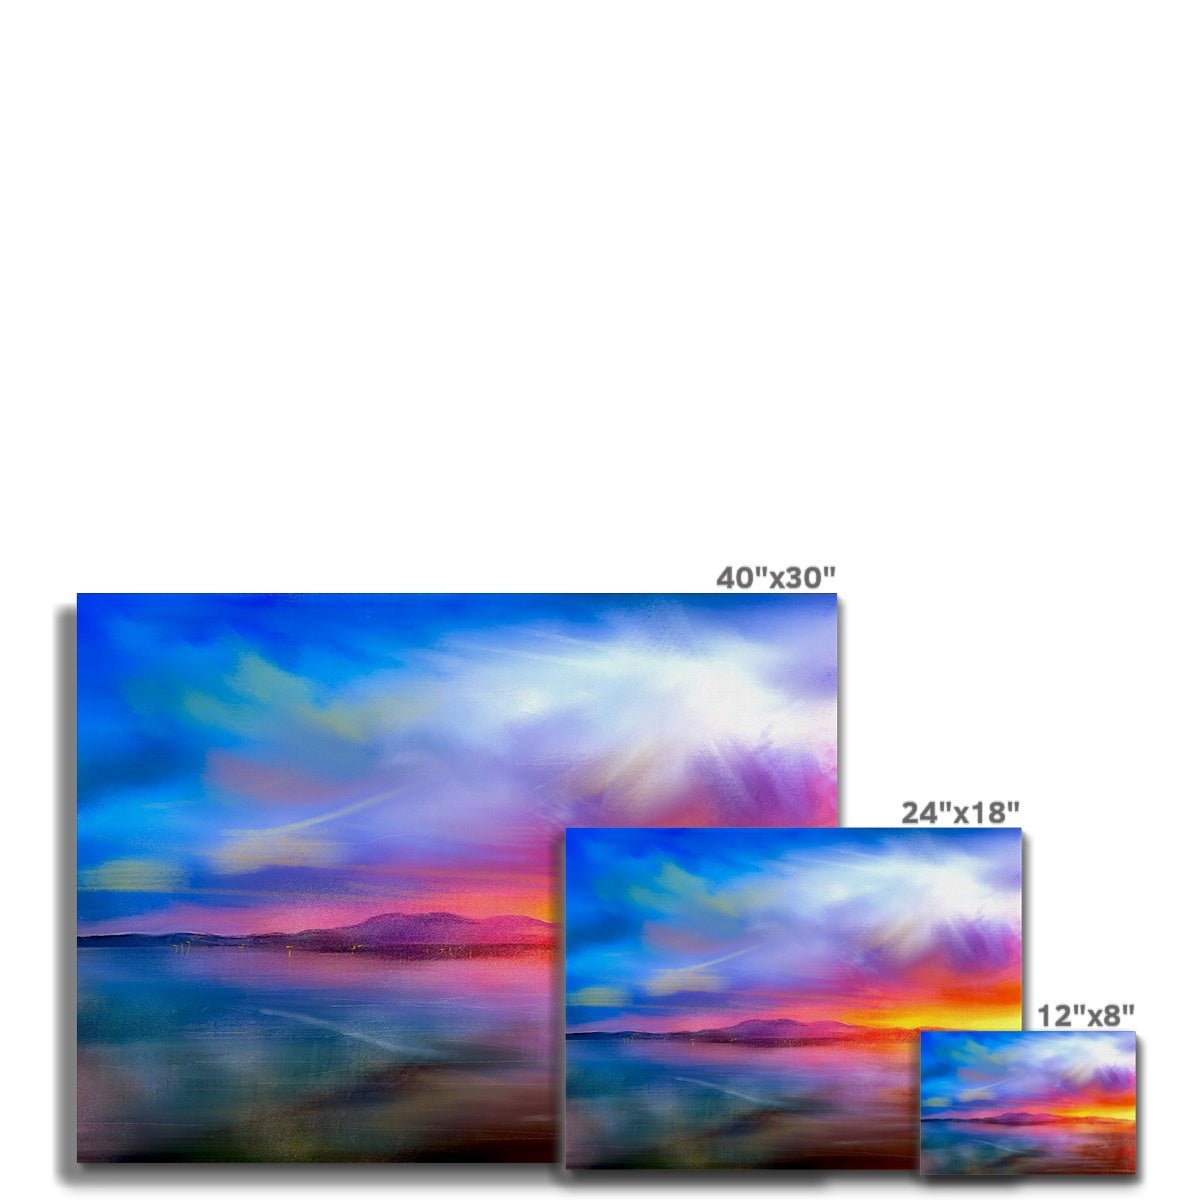 Arran Sunset Painting | Canvas From Scotland-Contemporary Stretched Canvas Prints-Arran Art Gallery-Paintings, Prints, Homeware, Art Gifts From Scotland By Scottish Artist Kevin Hunter